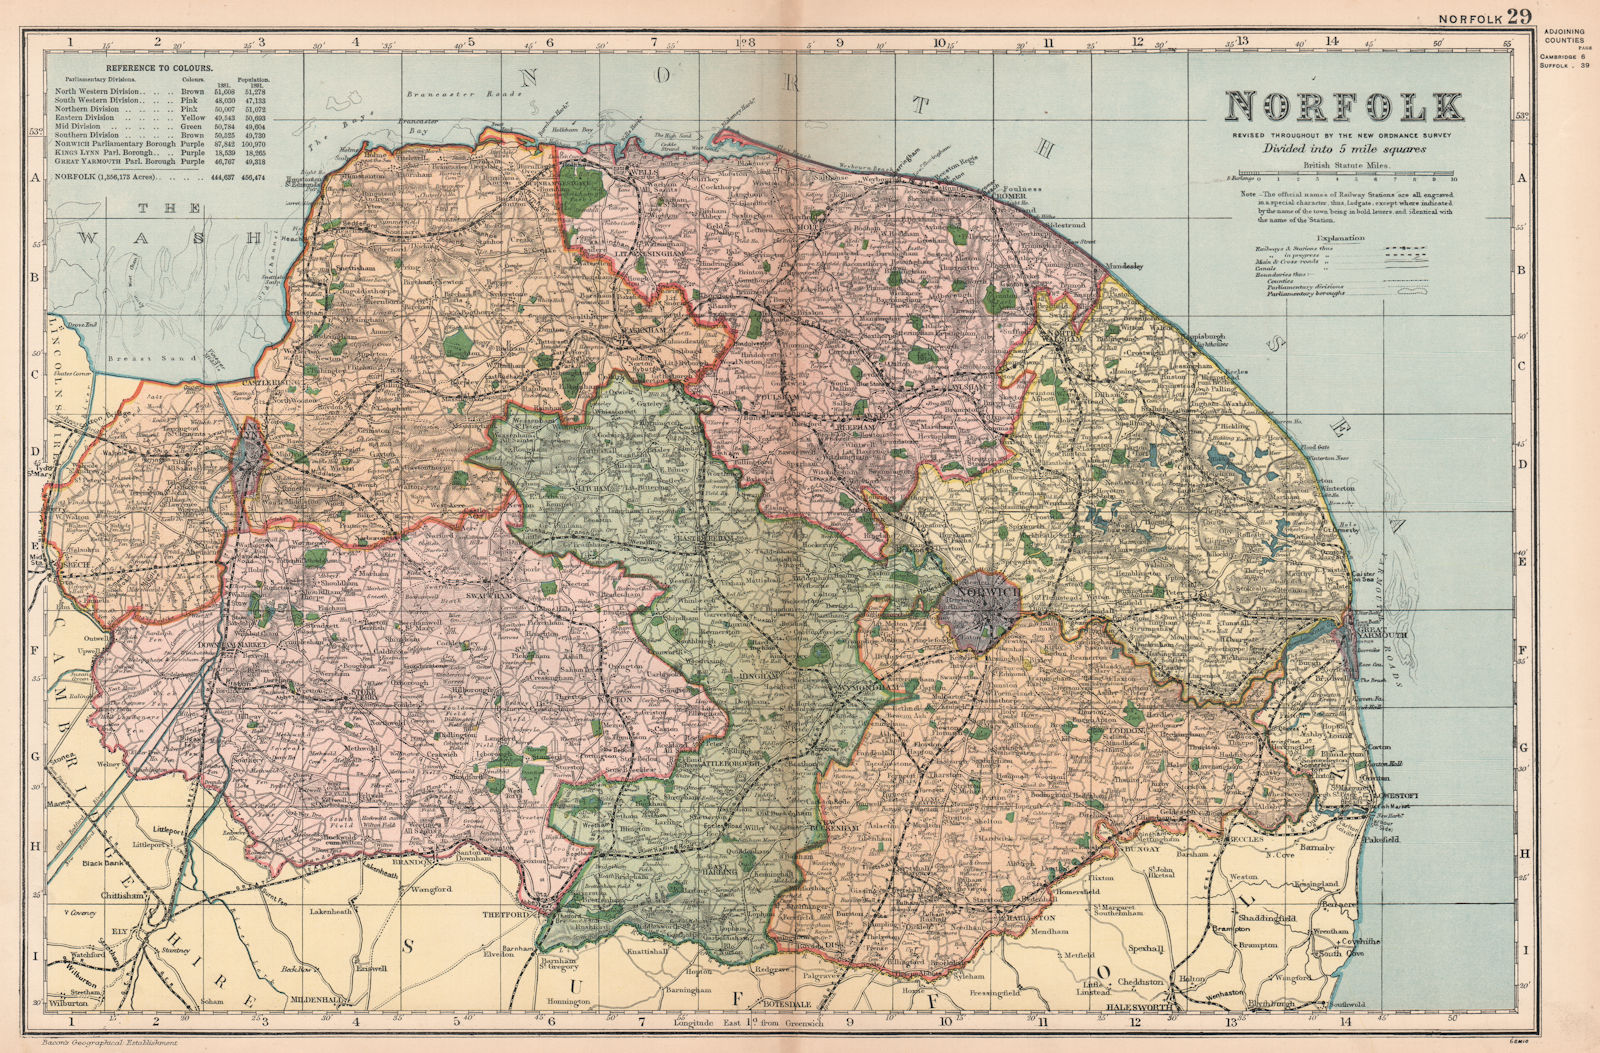 NORFOLK. Showing Parliamentary divisions, boroughs & parks. BACON 1901 old map